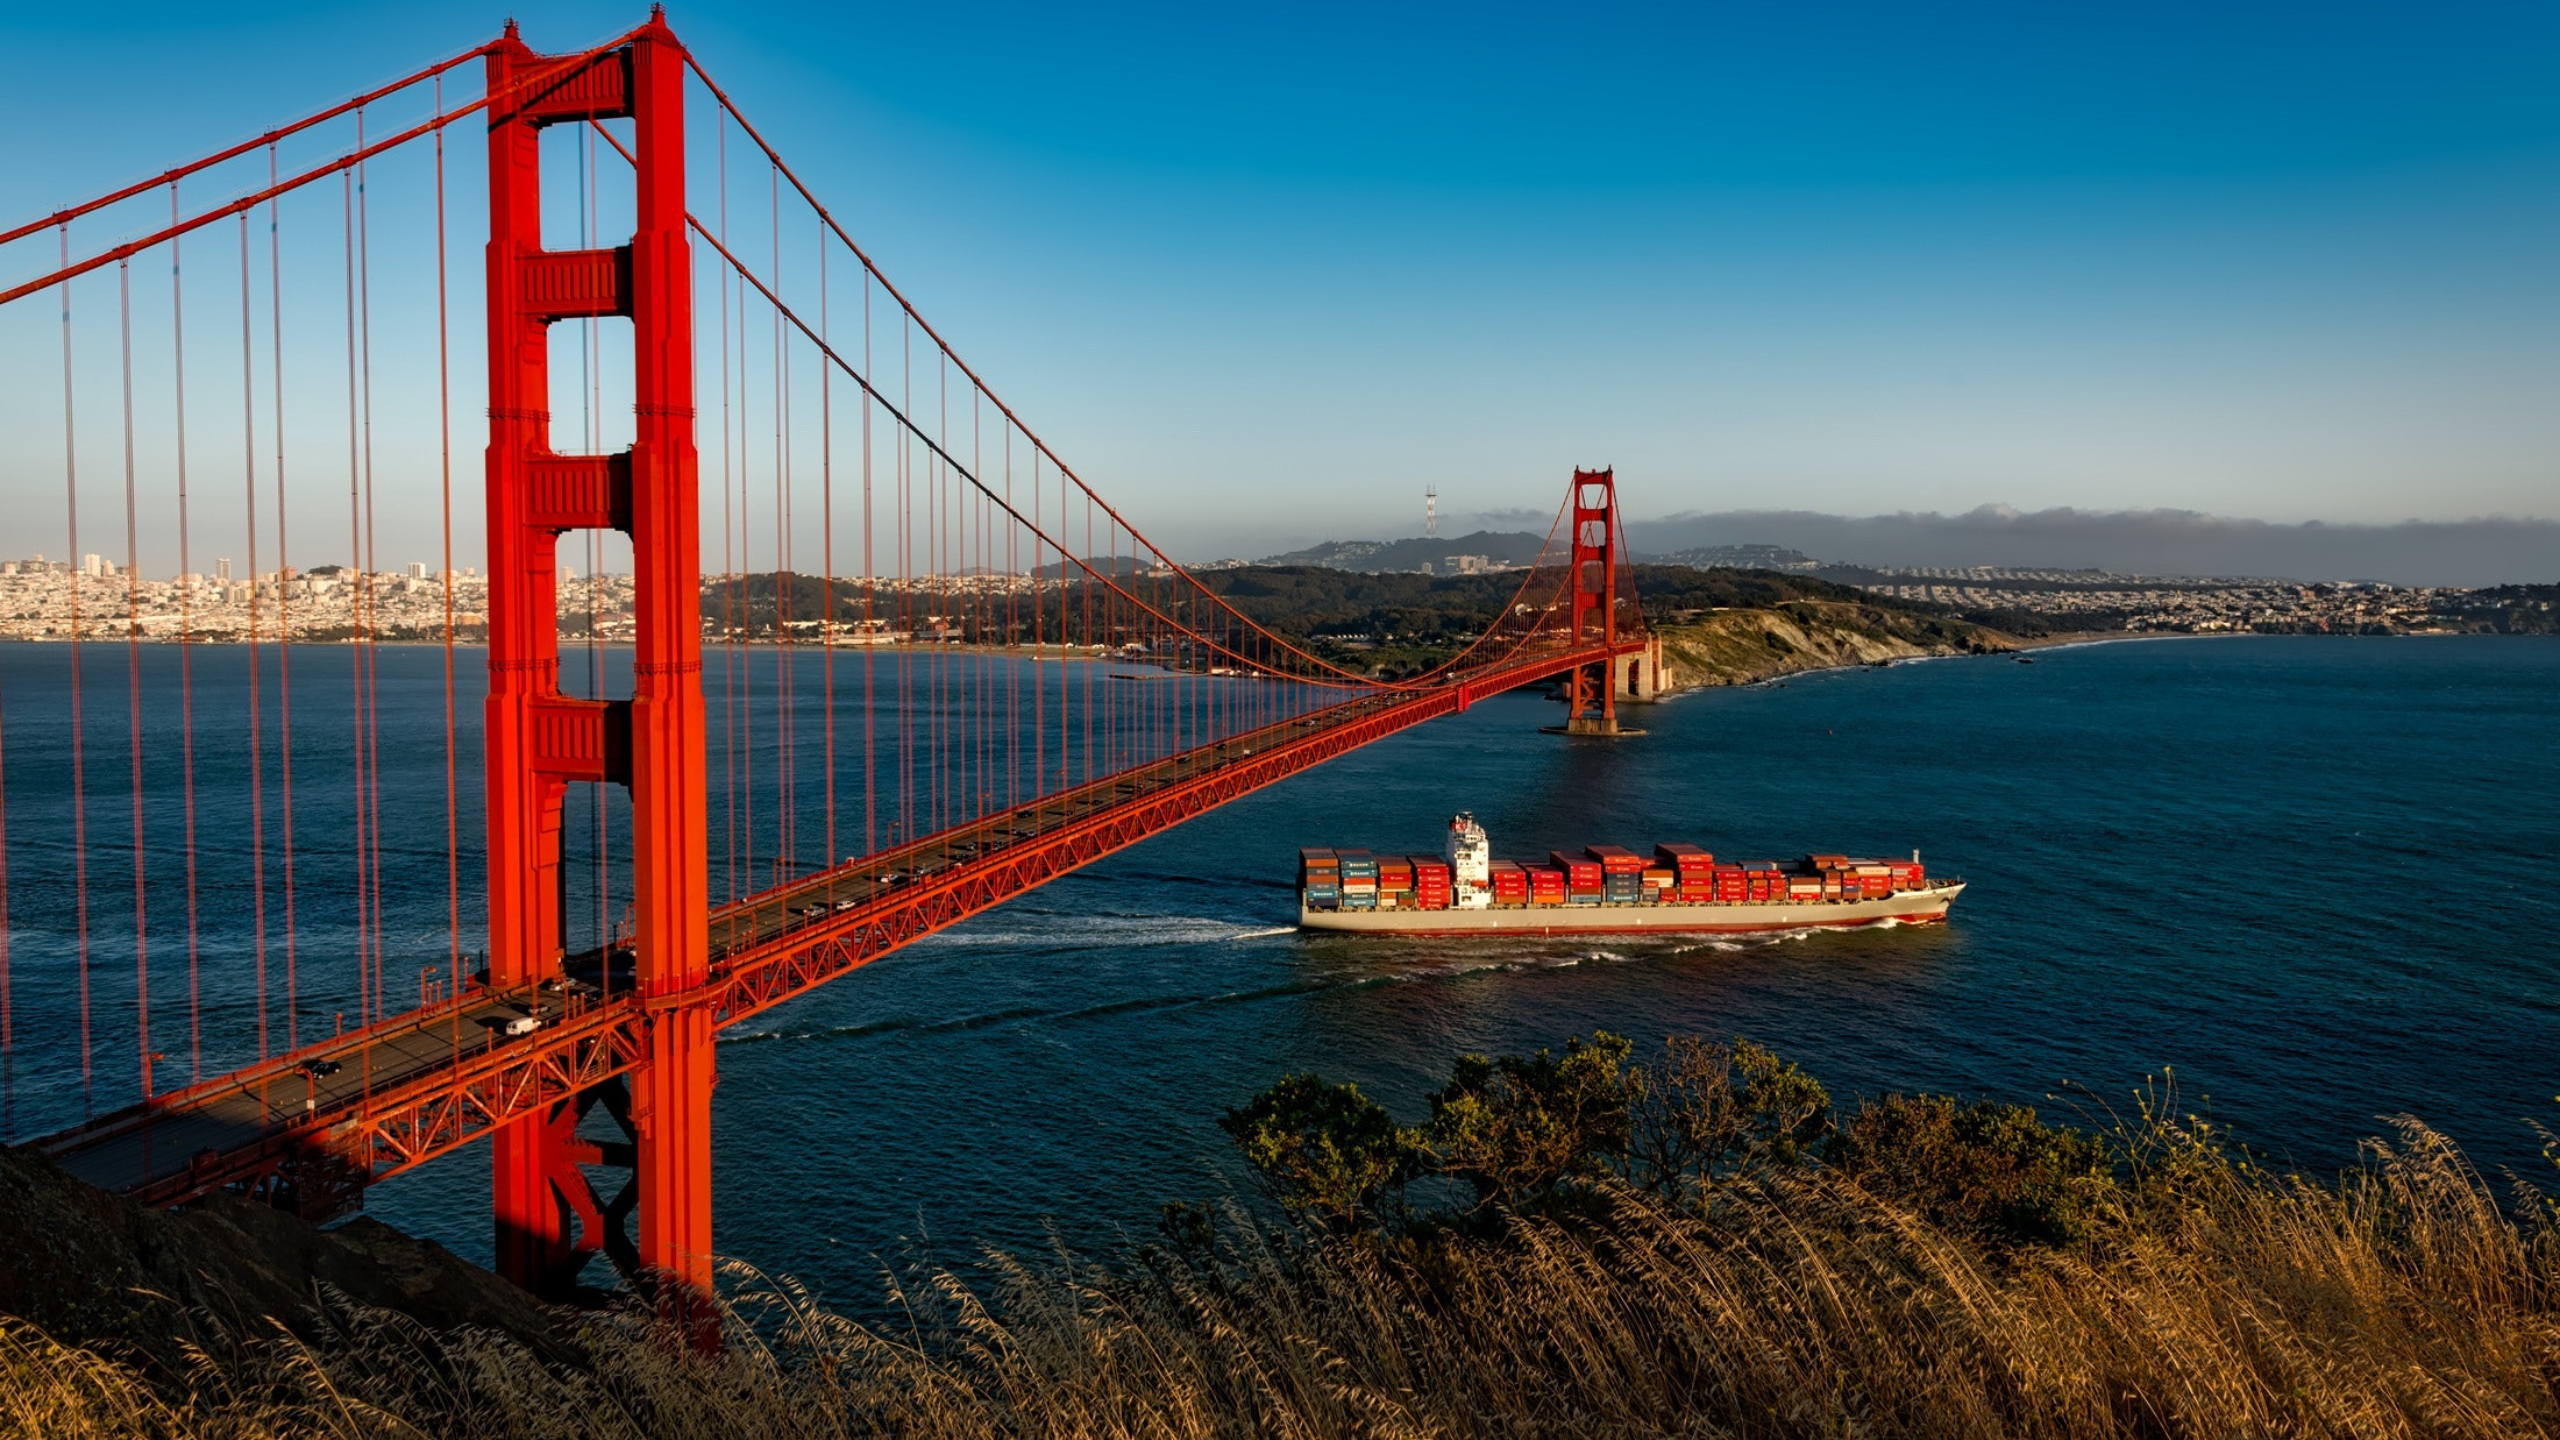 Container ship passes under the Golden Gate bridge in San Francisco